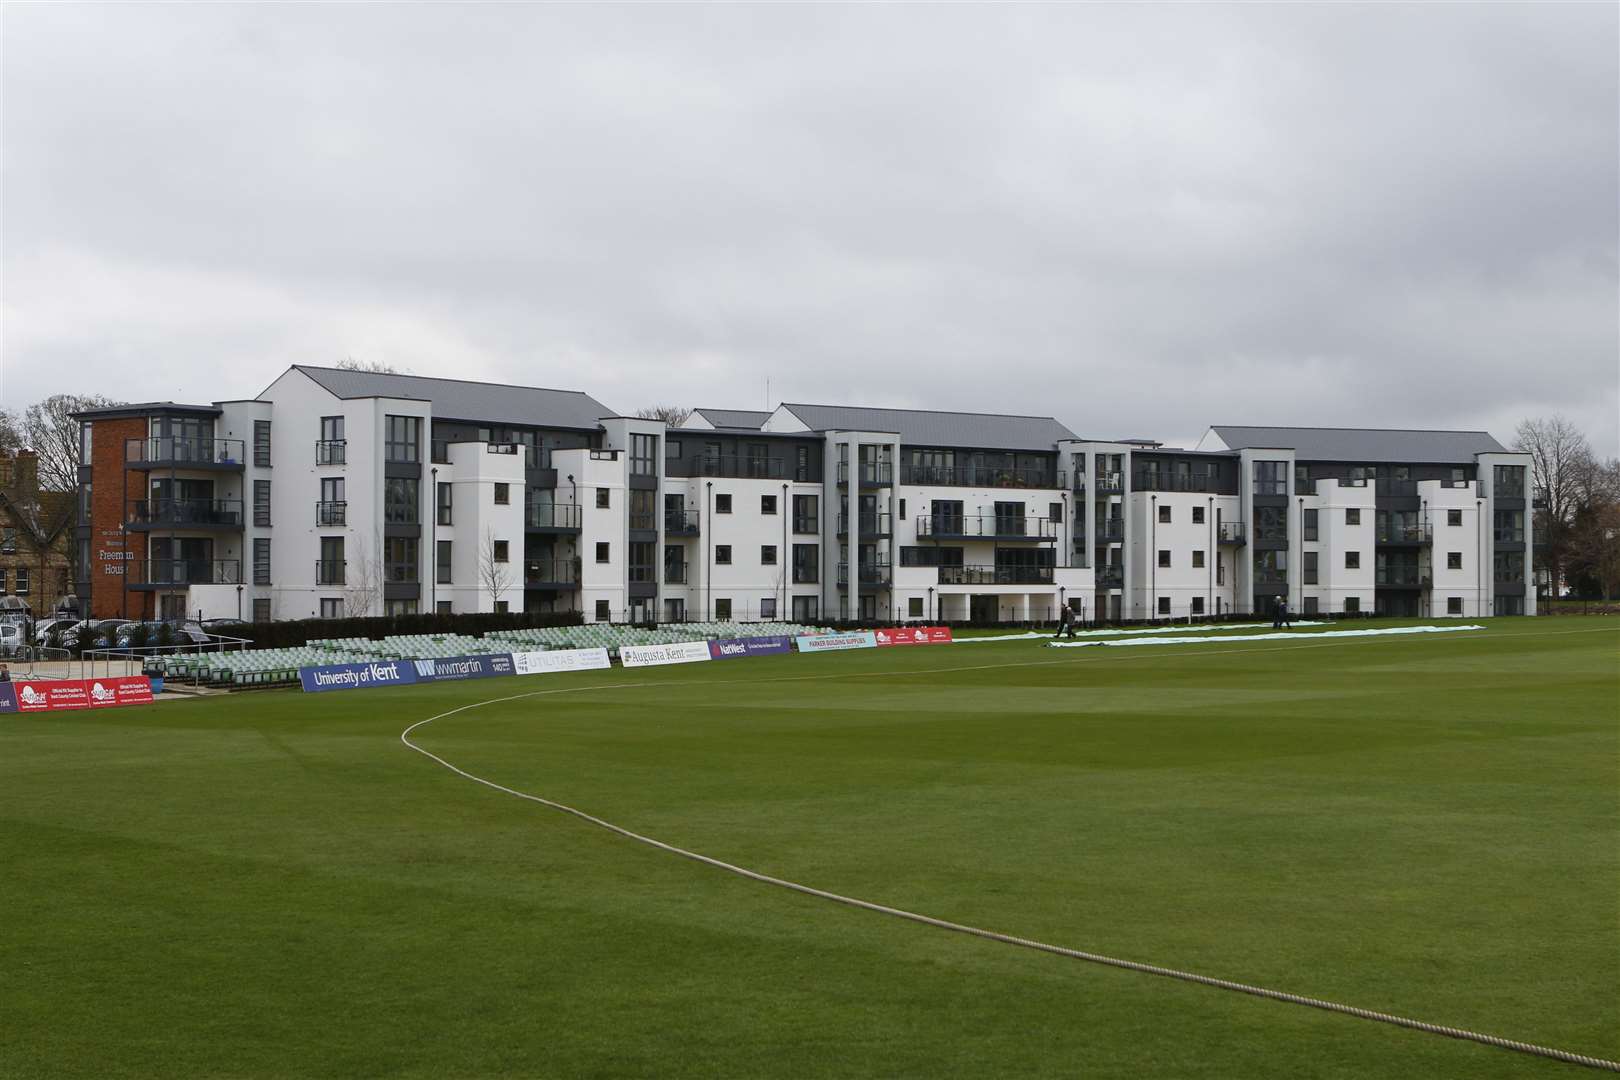 The new flats built at the St Lawrence Ground during the mid 2010s